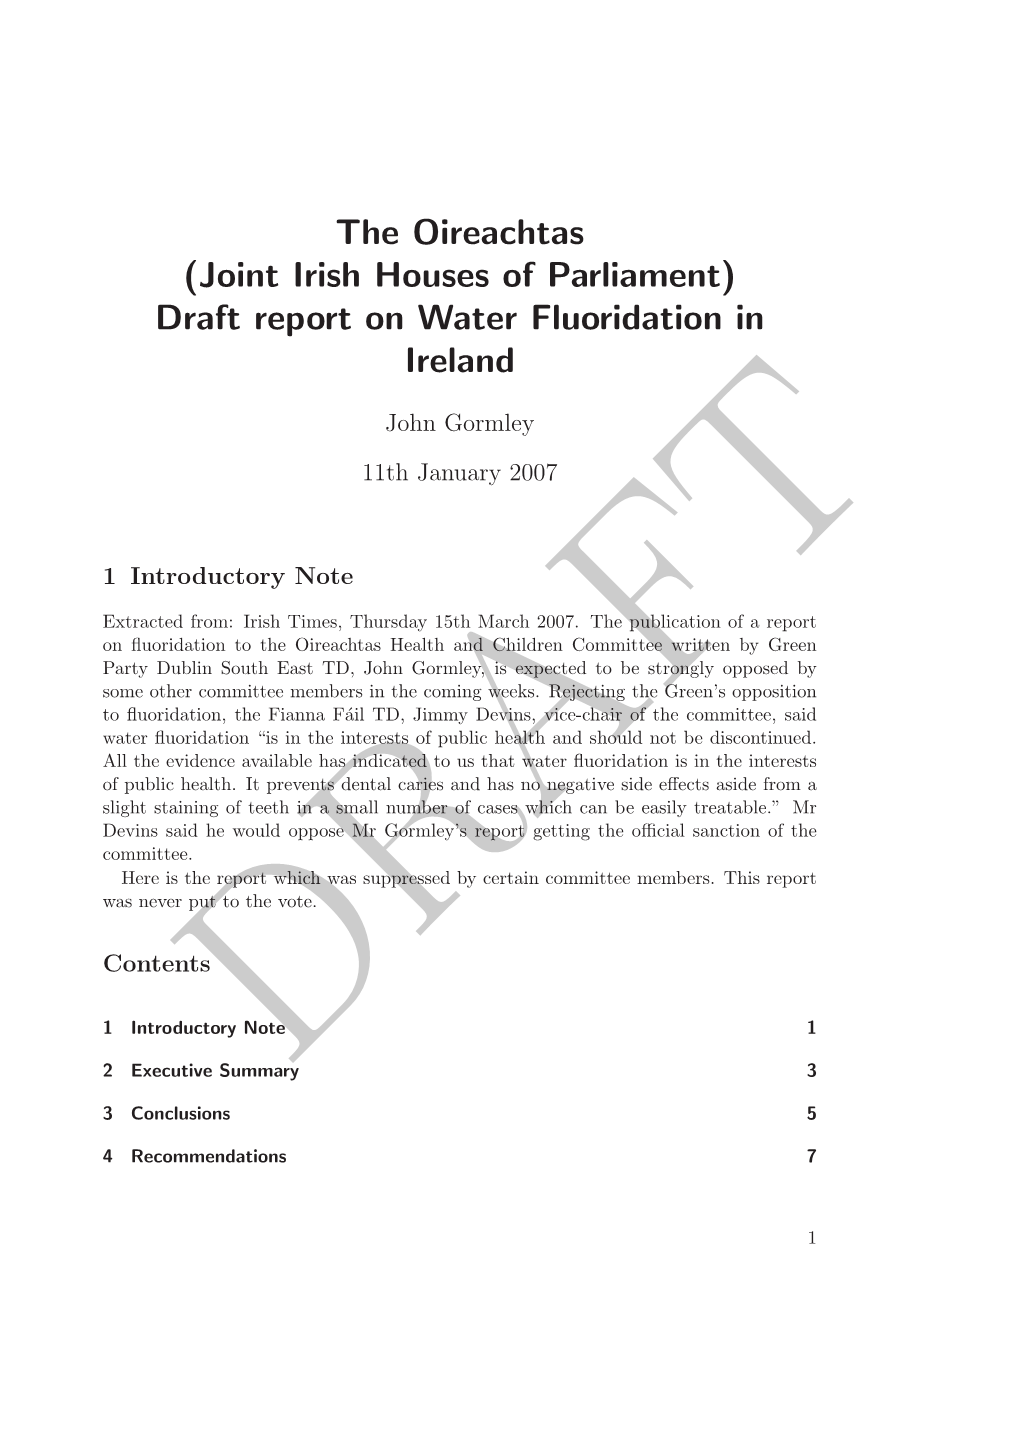 The Oireachtas (Joint Irish Houses of Parliament) Draft Report on Water Fluoridation in Ireland